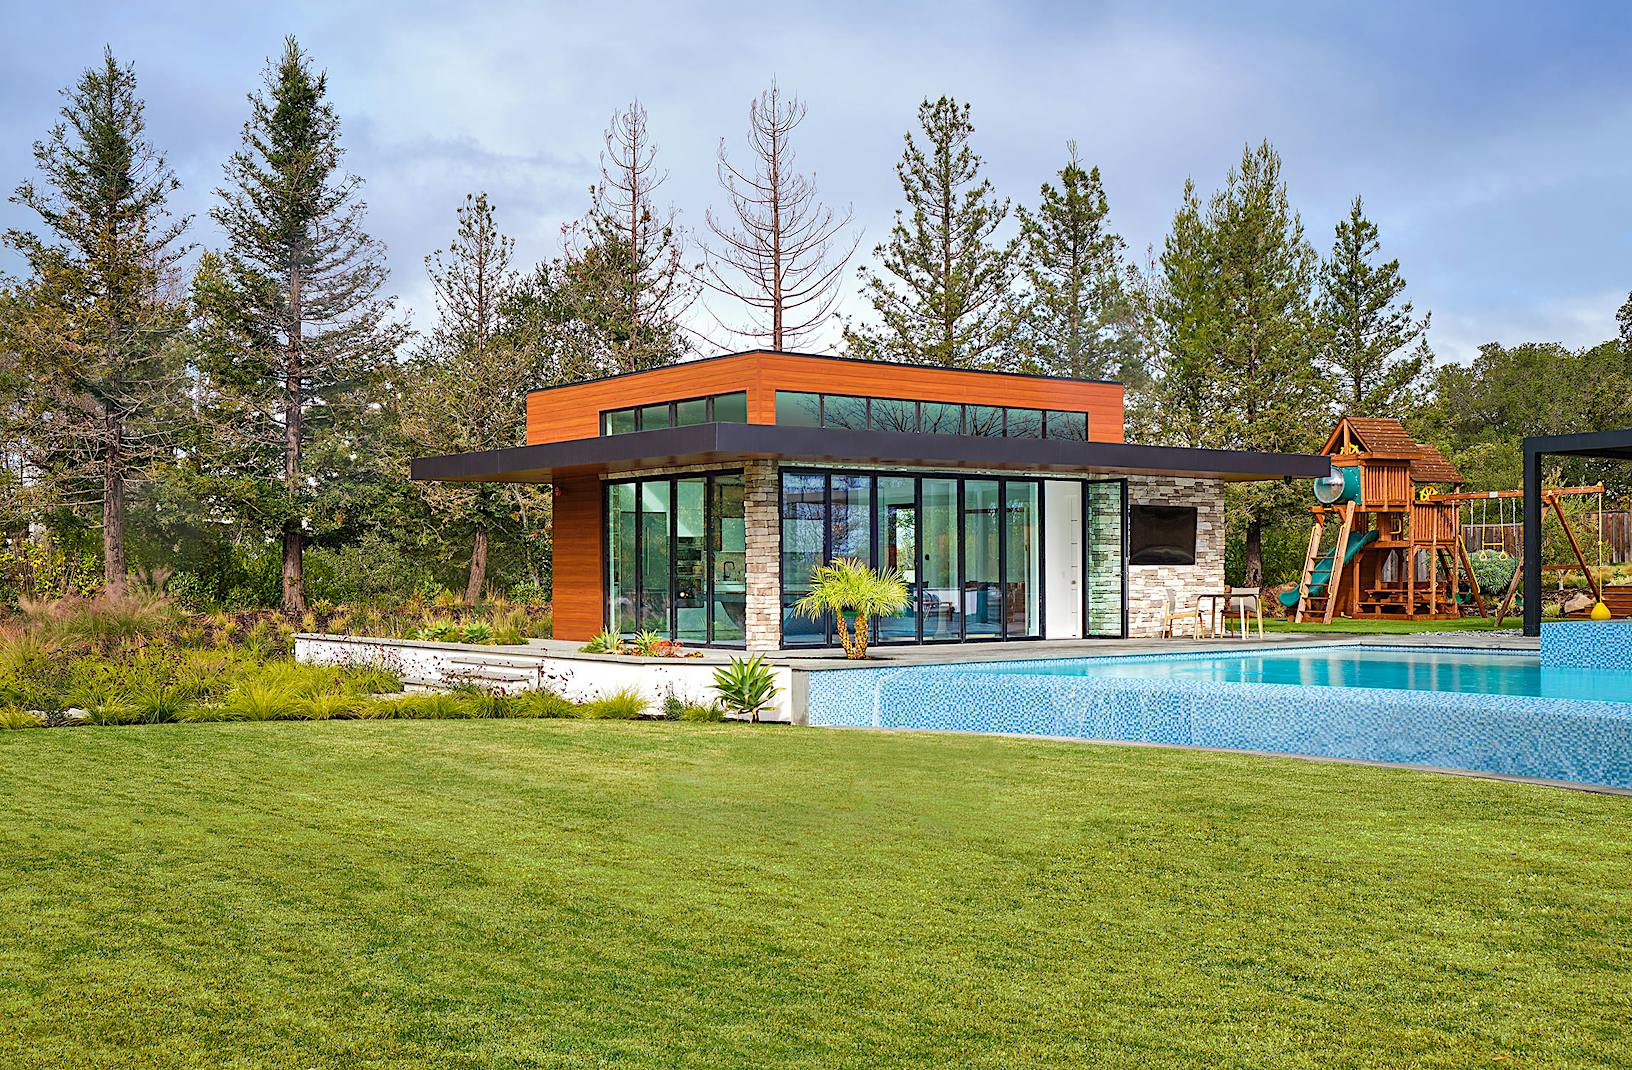 Contemporary pool house with bifold glass walls creating an indoor/outdoor area